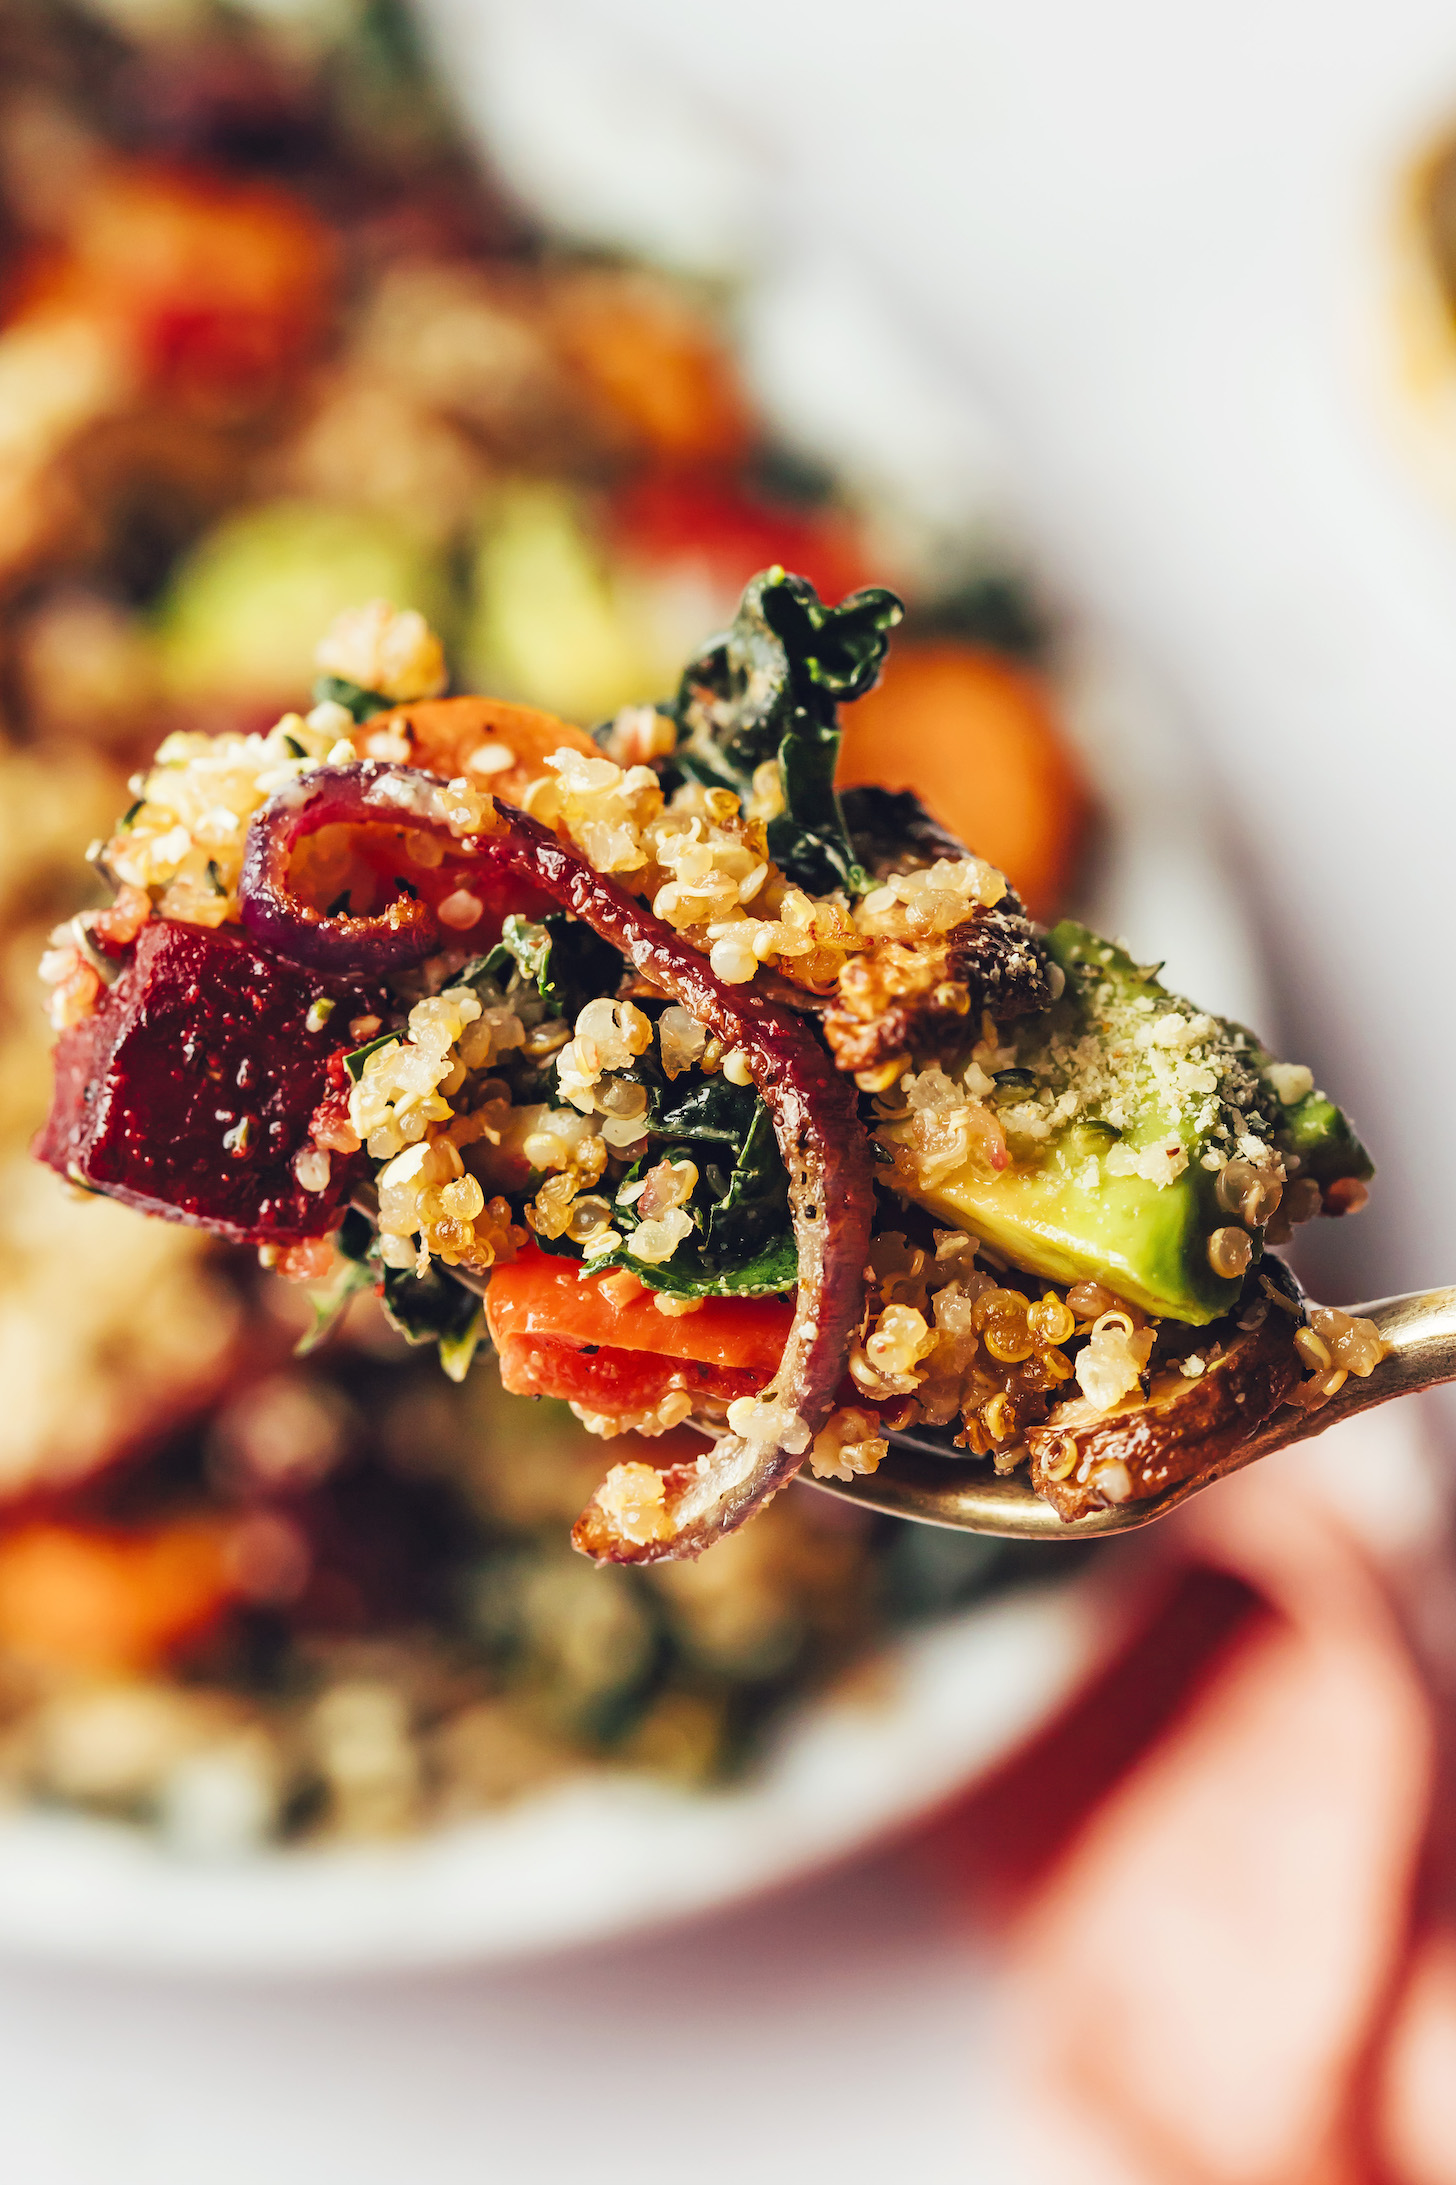 Close-up shot of a fork holding a bite of crispy quinoa and roasted vegetable kale salad